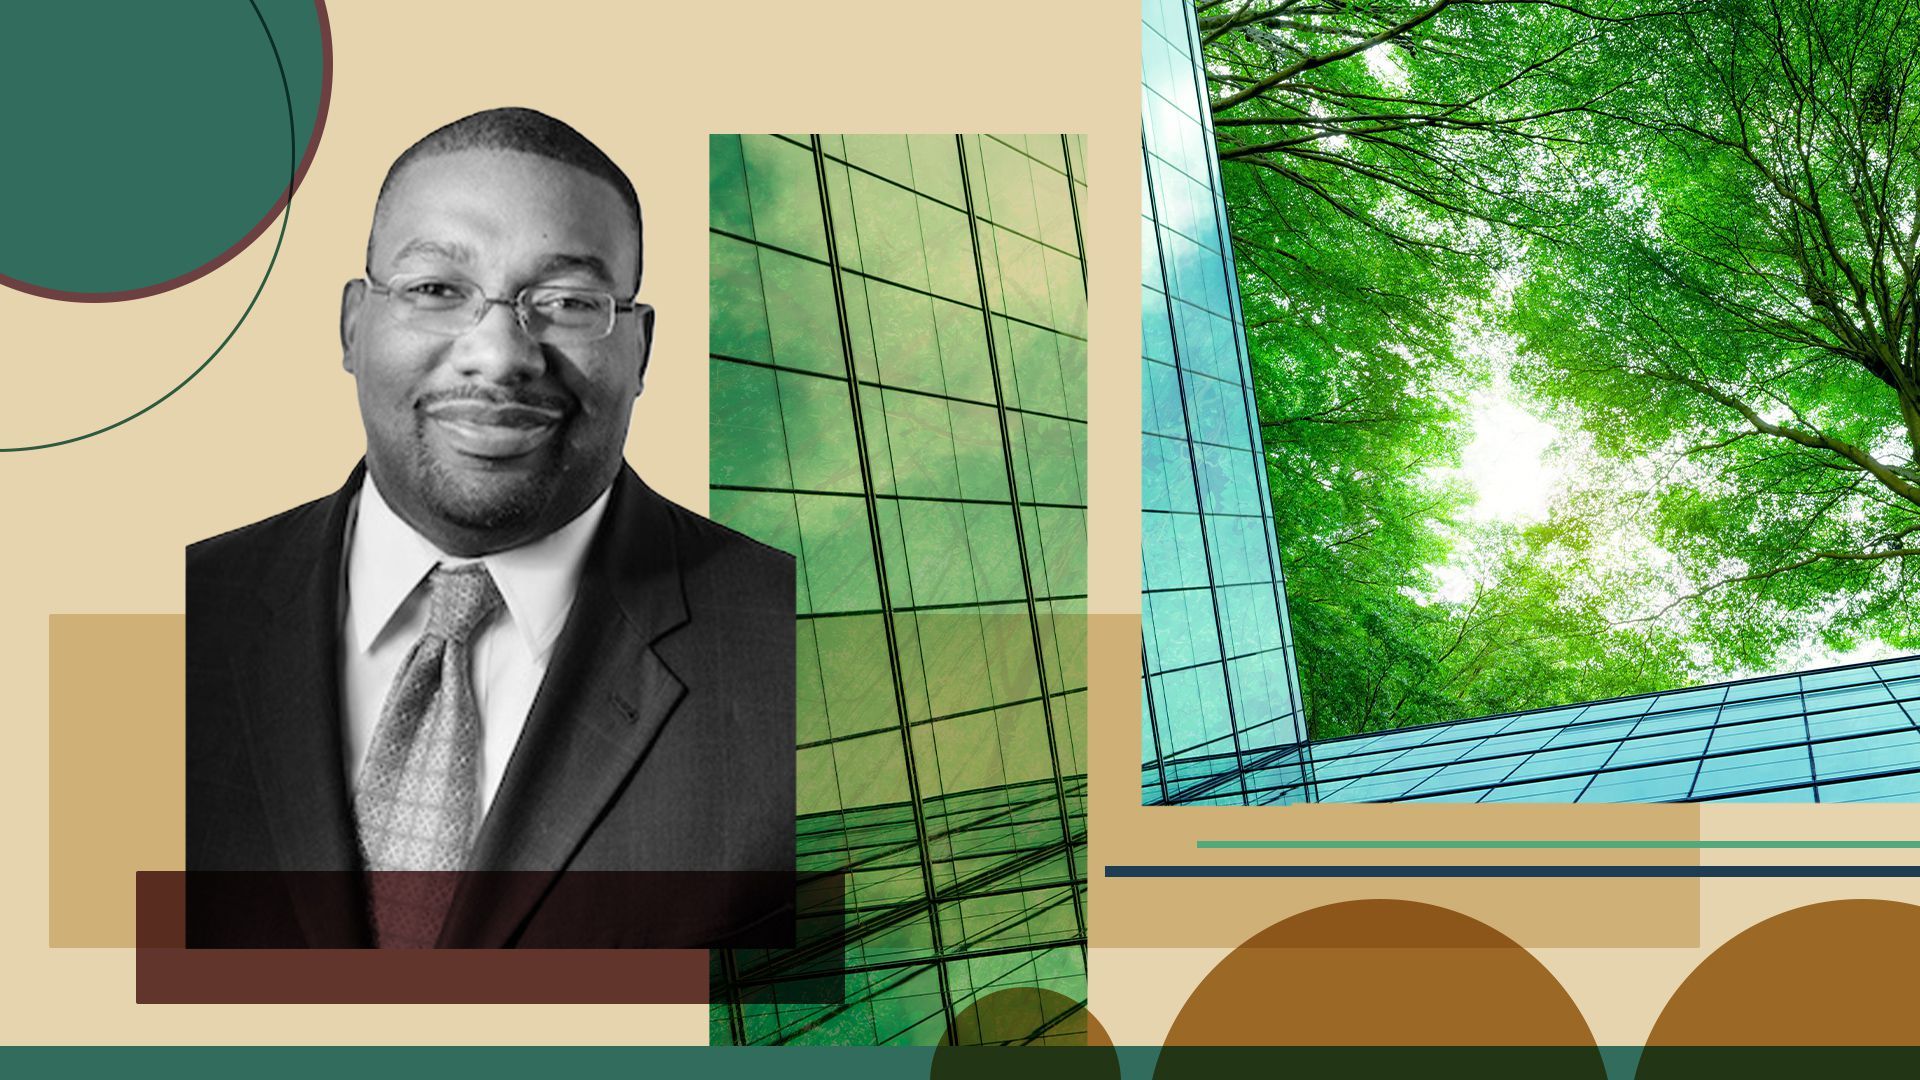 Photo illustration of Trenton Allen, CEO of Sustainable Capital Advisors, with a building and trees and abstract shapes.